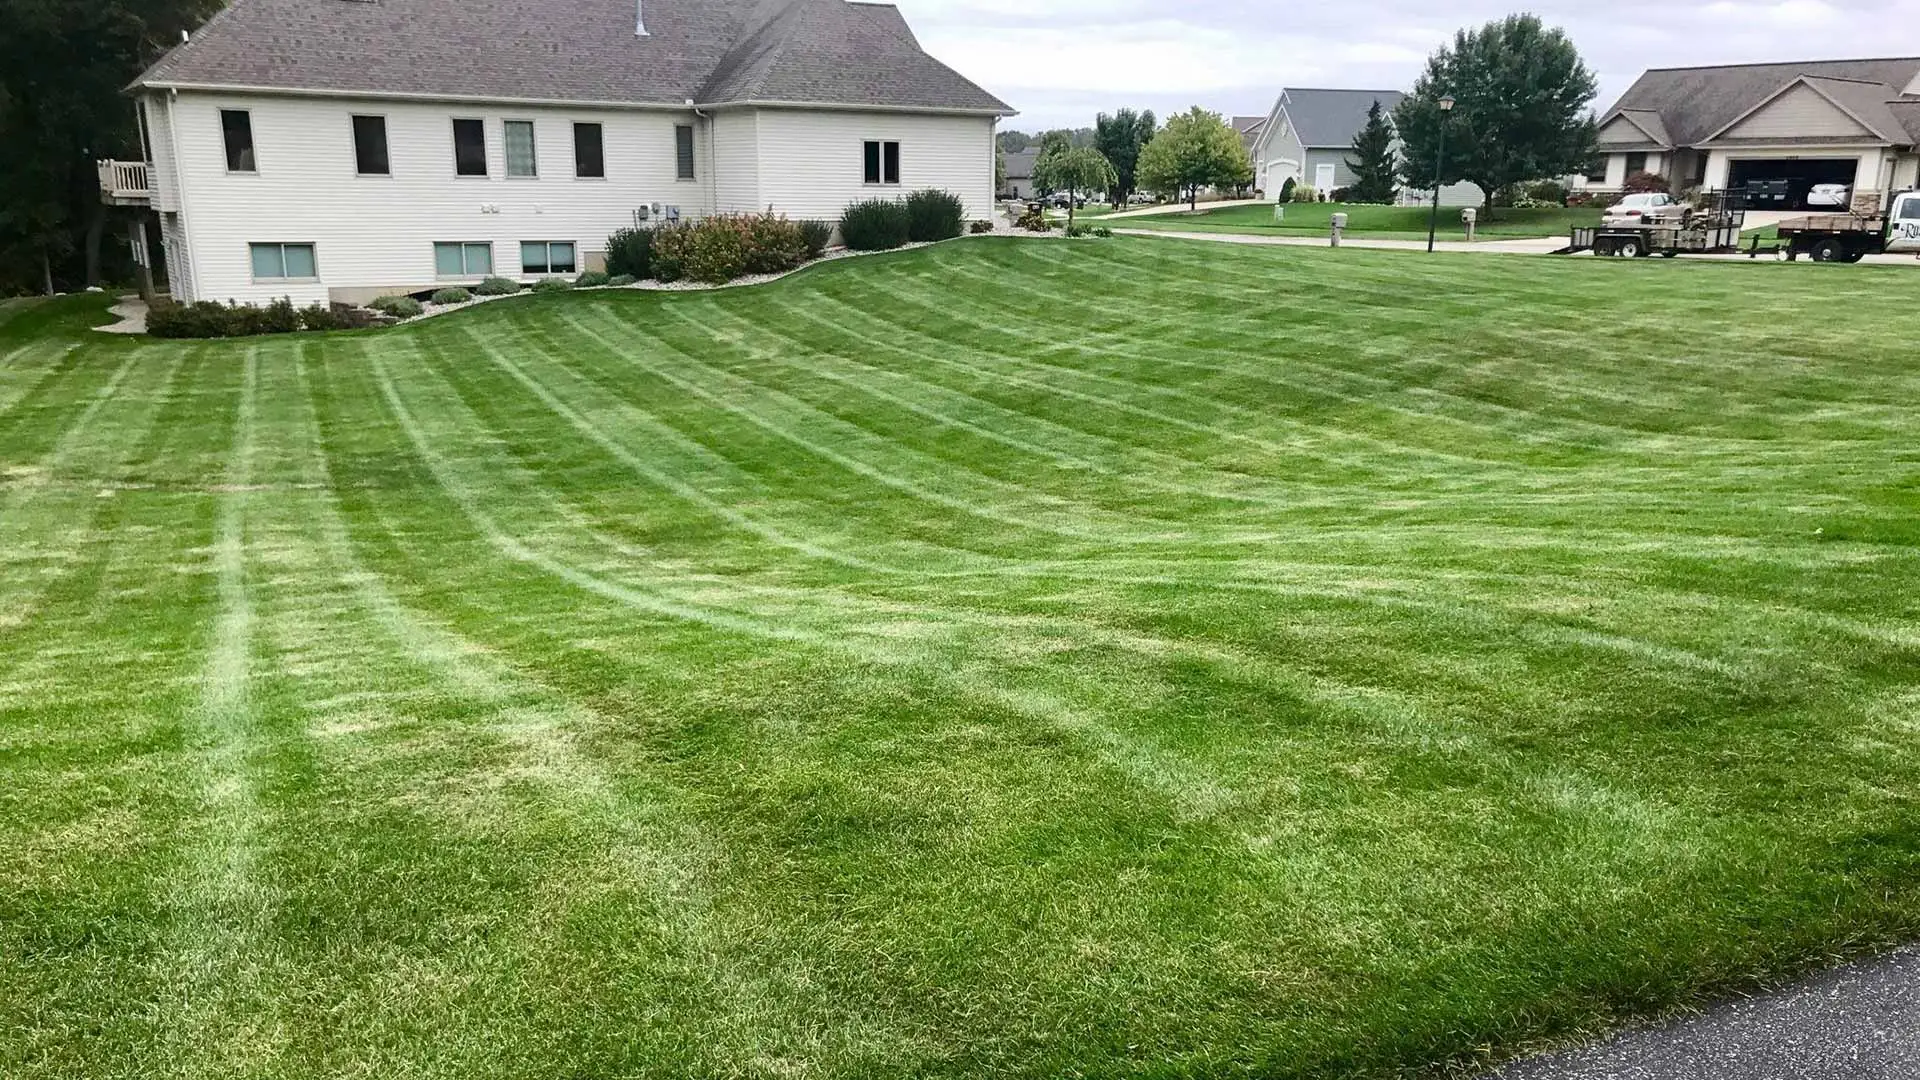 Freshly mowed lawn with added patterns in Holland, MI.